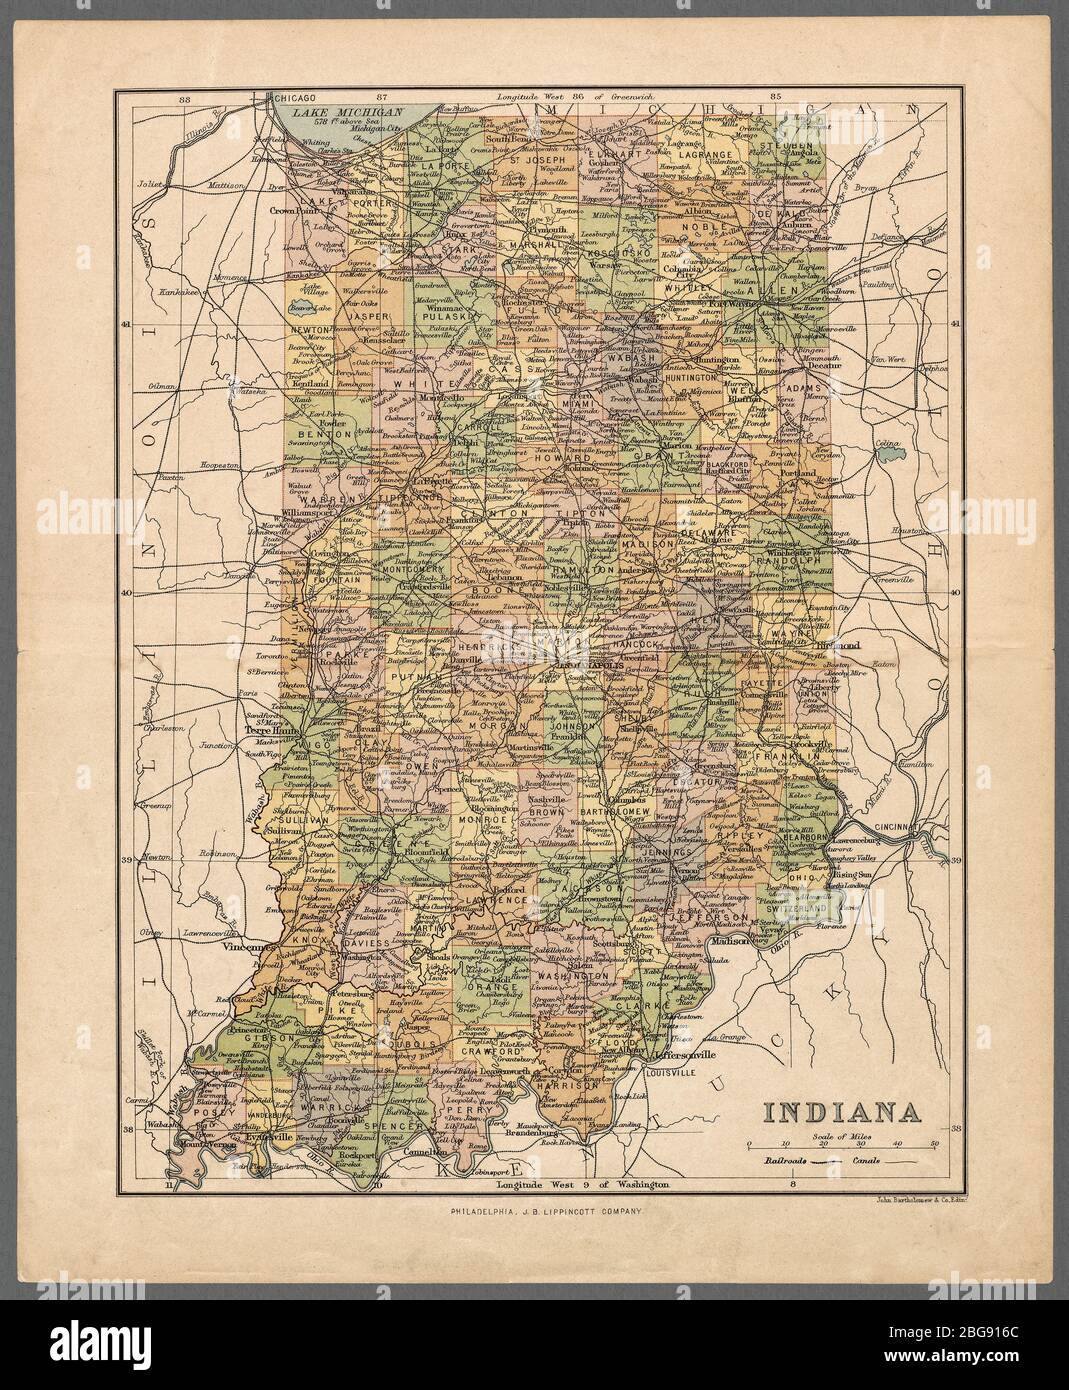 Indiana antique map showing counties, railroads, and canals, published circa, 1890, a digitally restored historic map. Note that many maps of this era gave longitude from Washington, DC, as well as Greenwich, probably in an effort to reduce British domination of cartography. Stock Photo